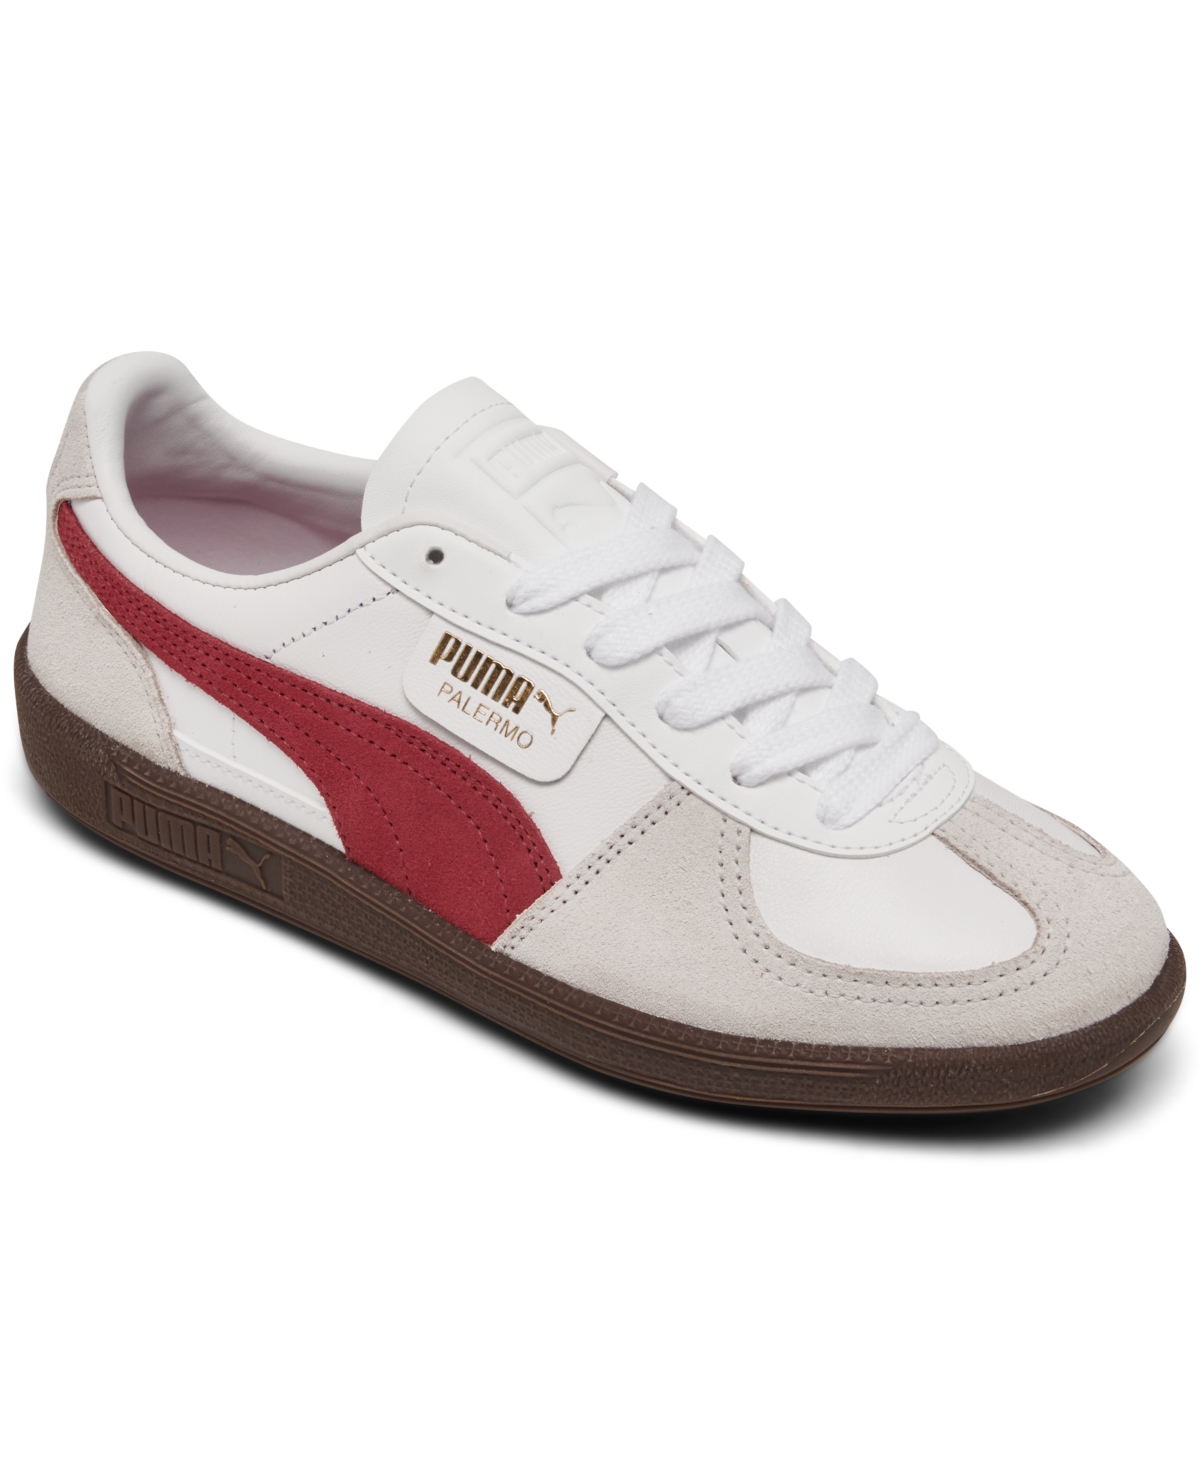 Women's Palermo Special Casual Sneakers from Finish Line - Puma White, Vapor Gray